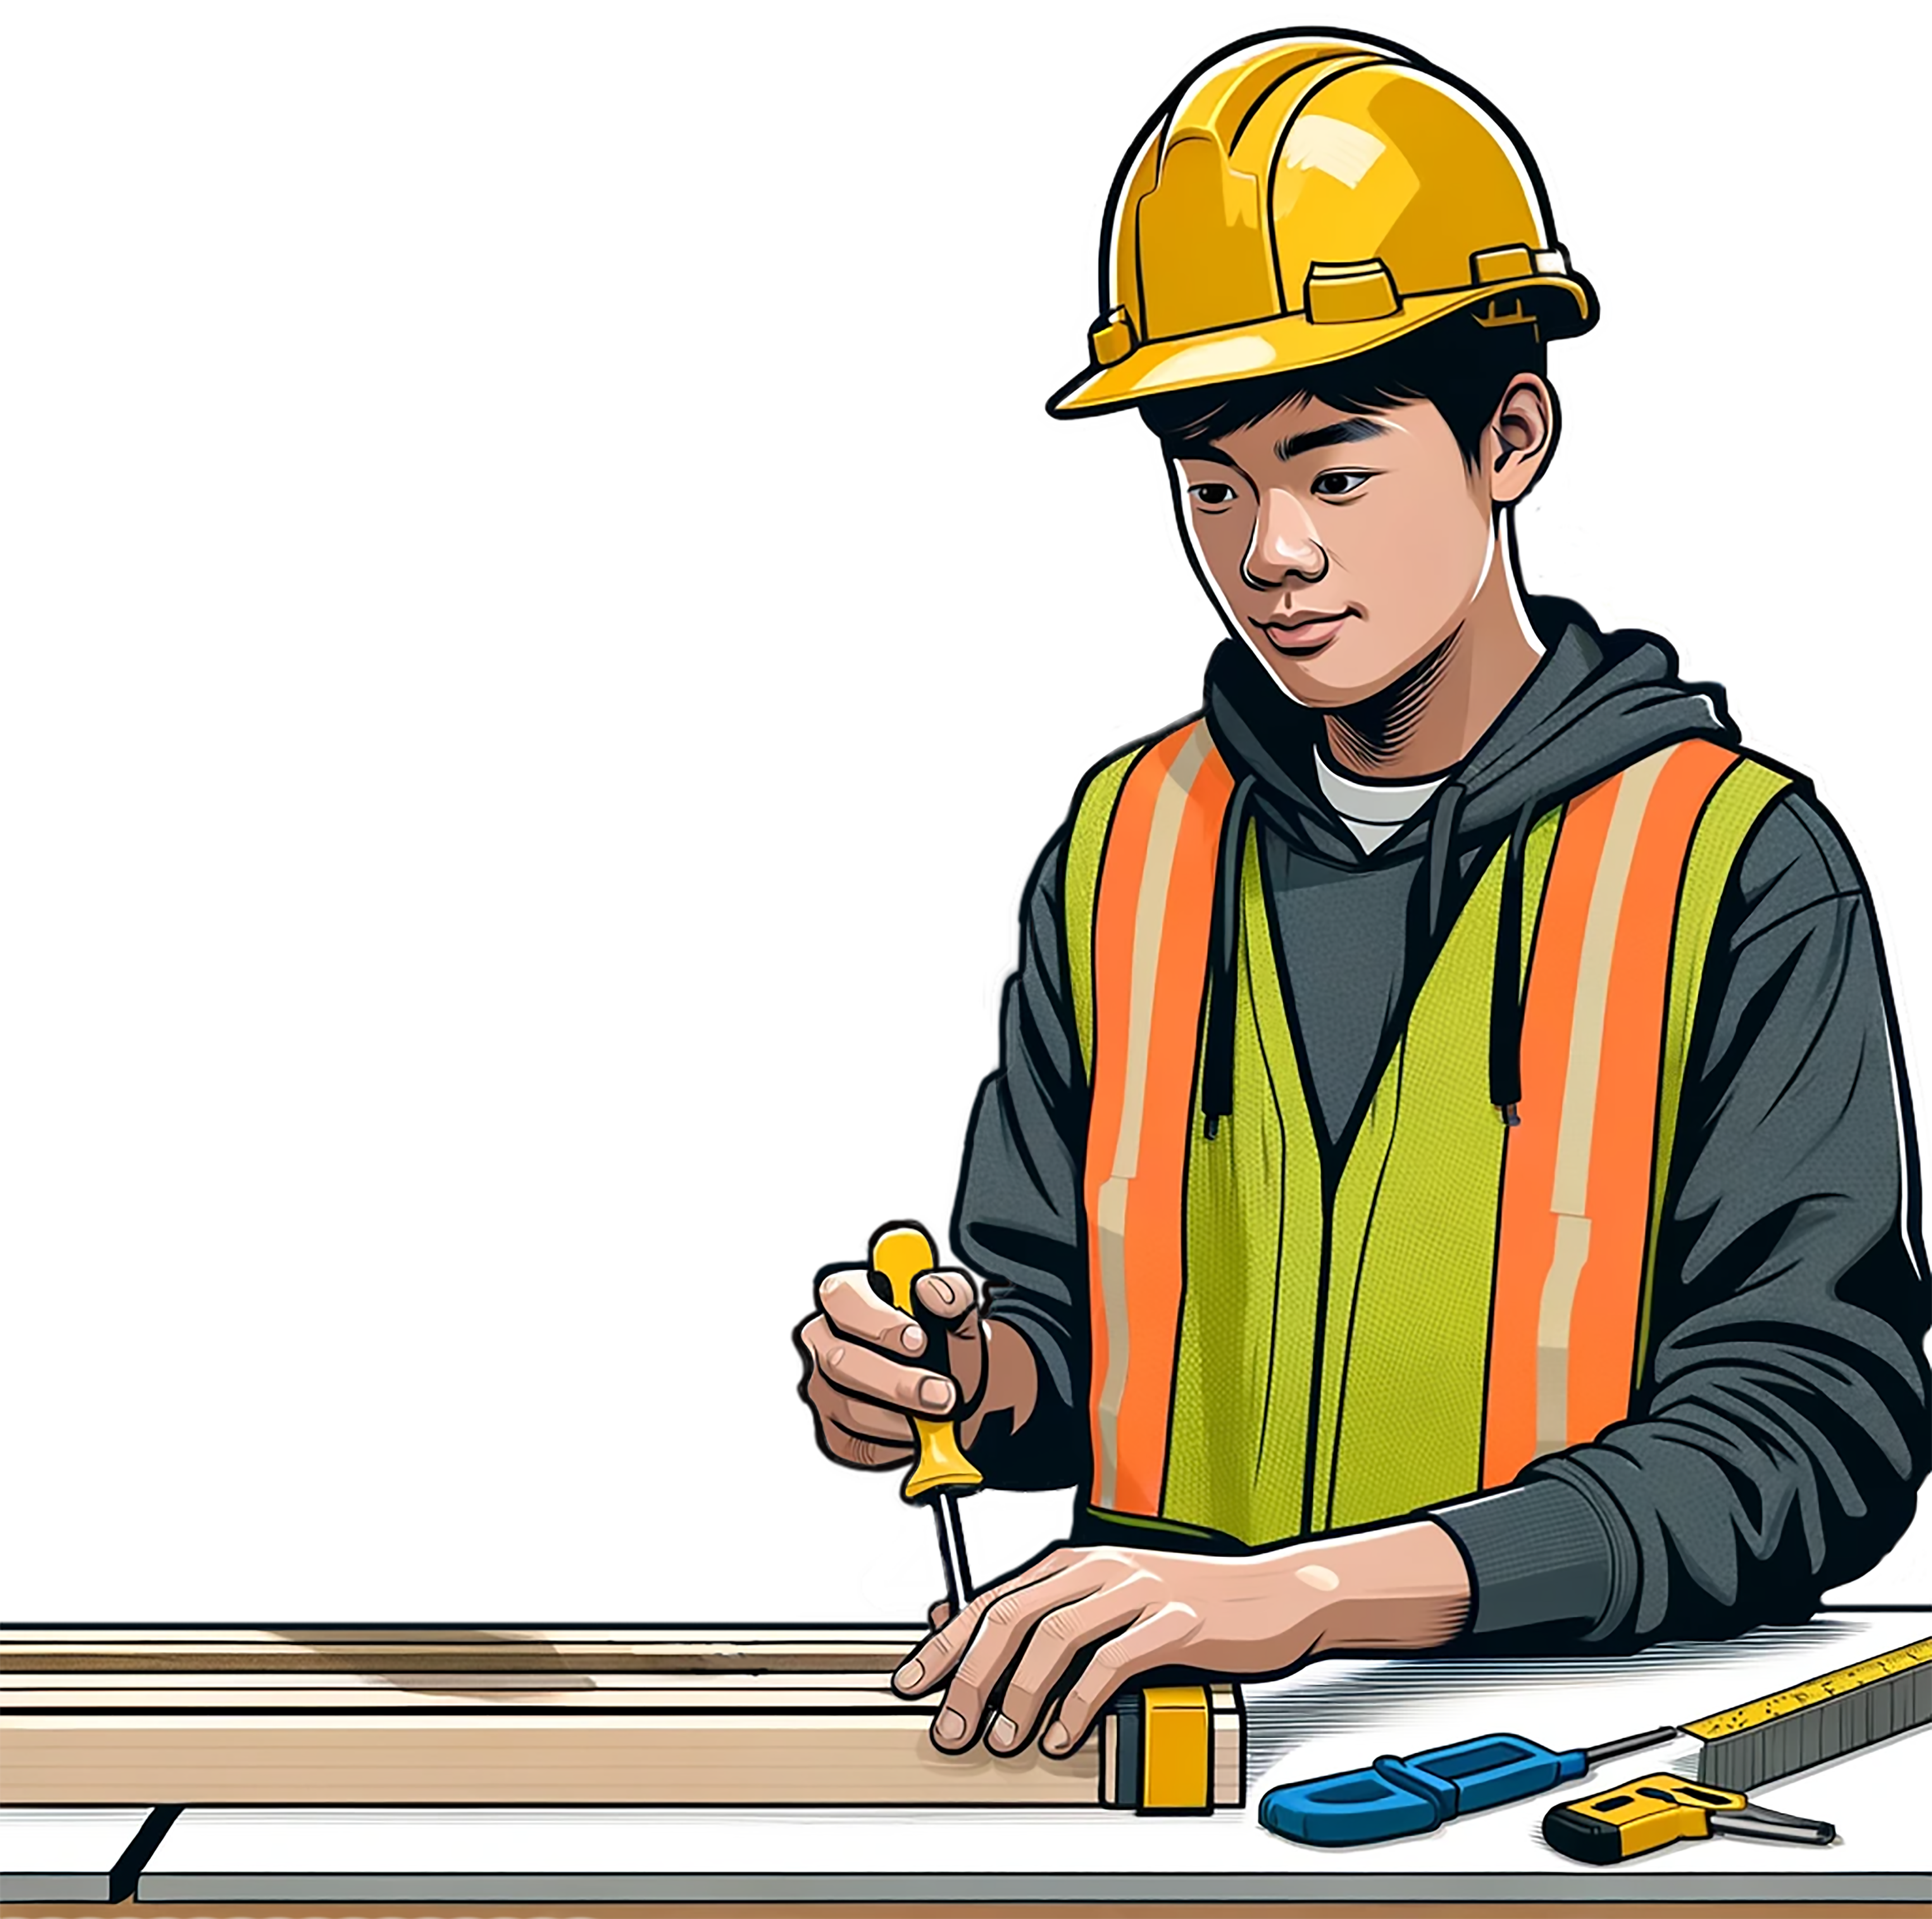 Illustration showing a carpentry apprentice wearing personal protective equipment (PPE) while working on a woodworking project.